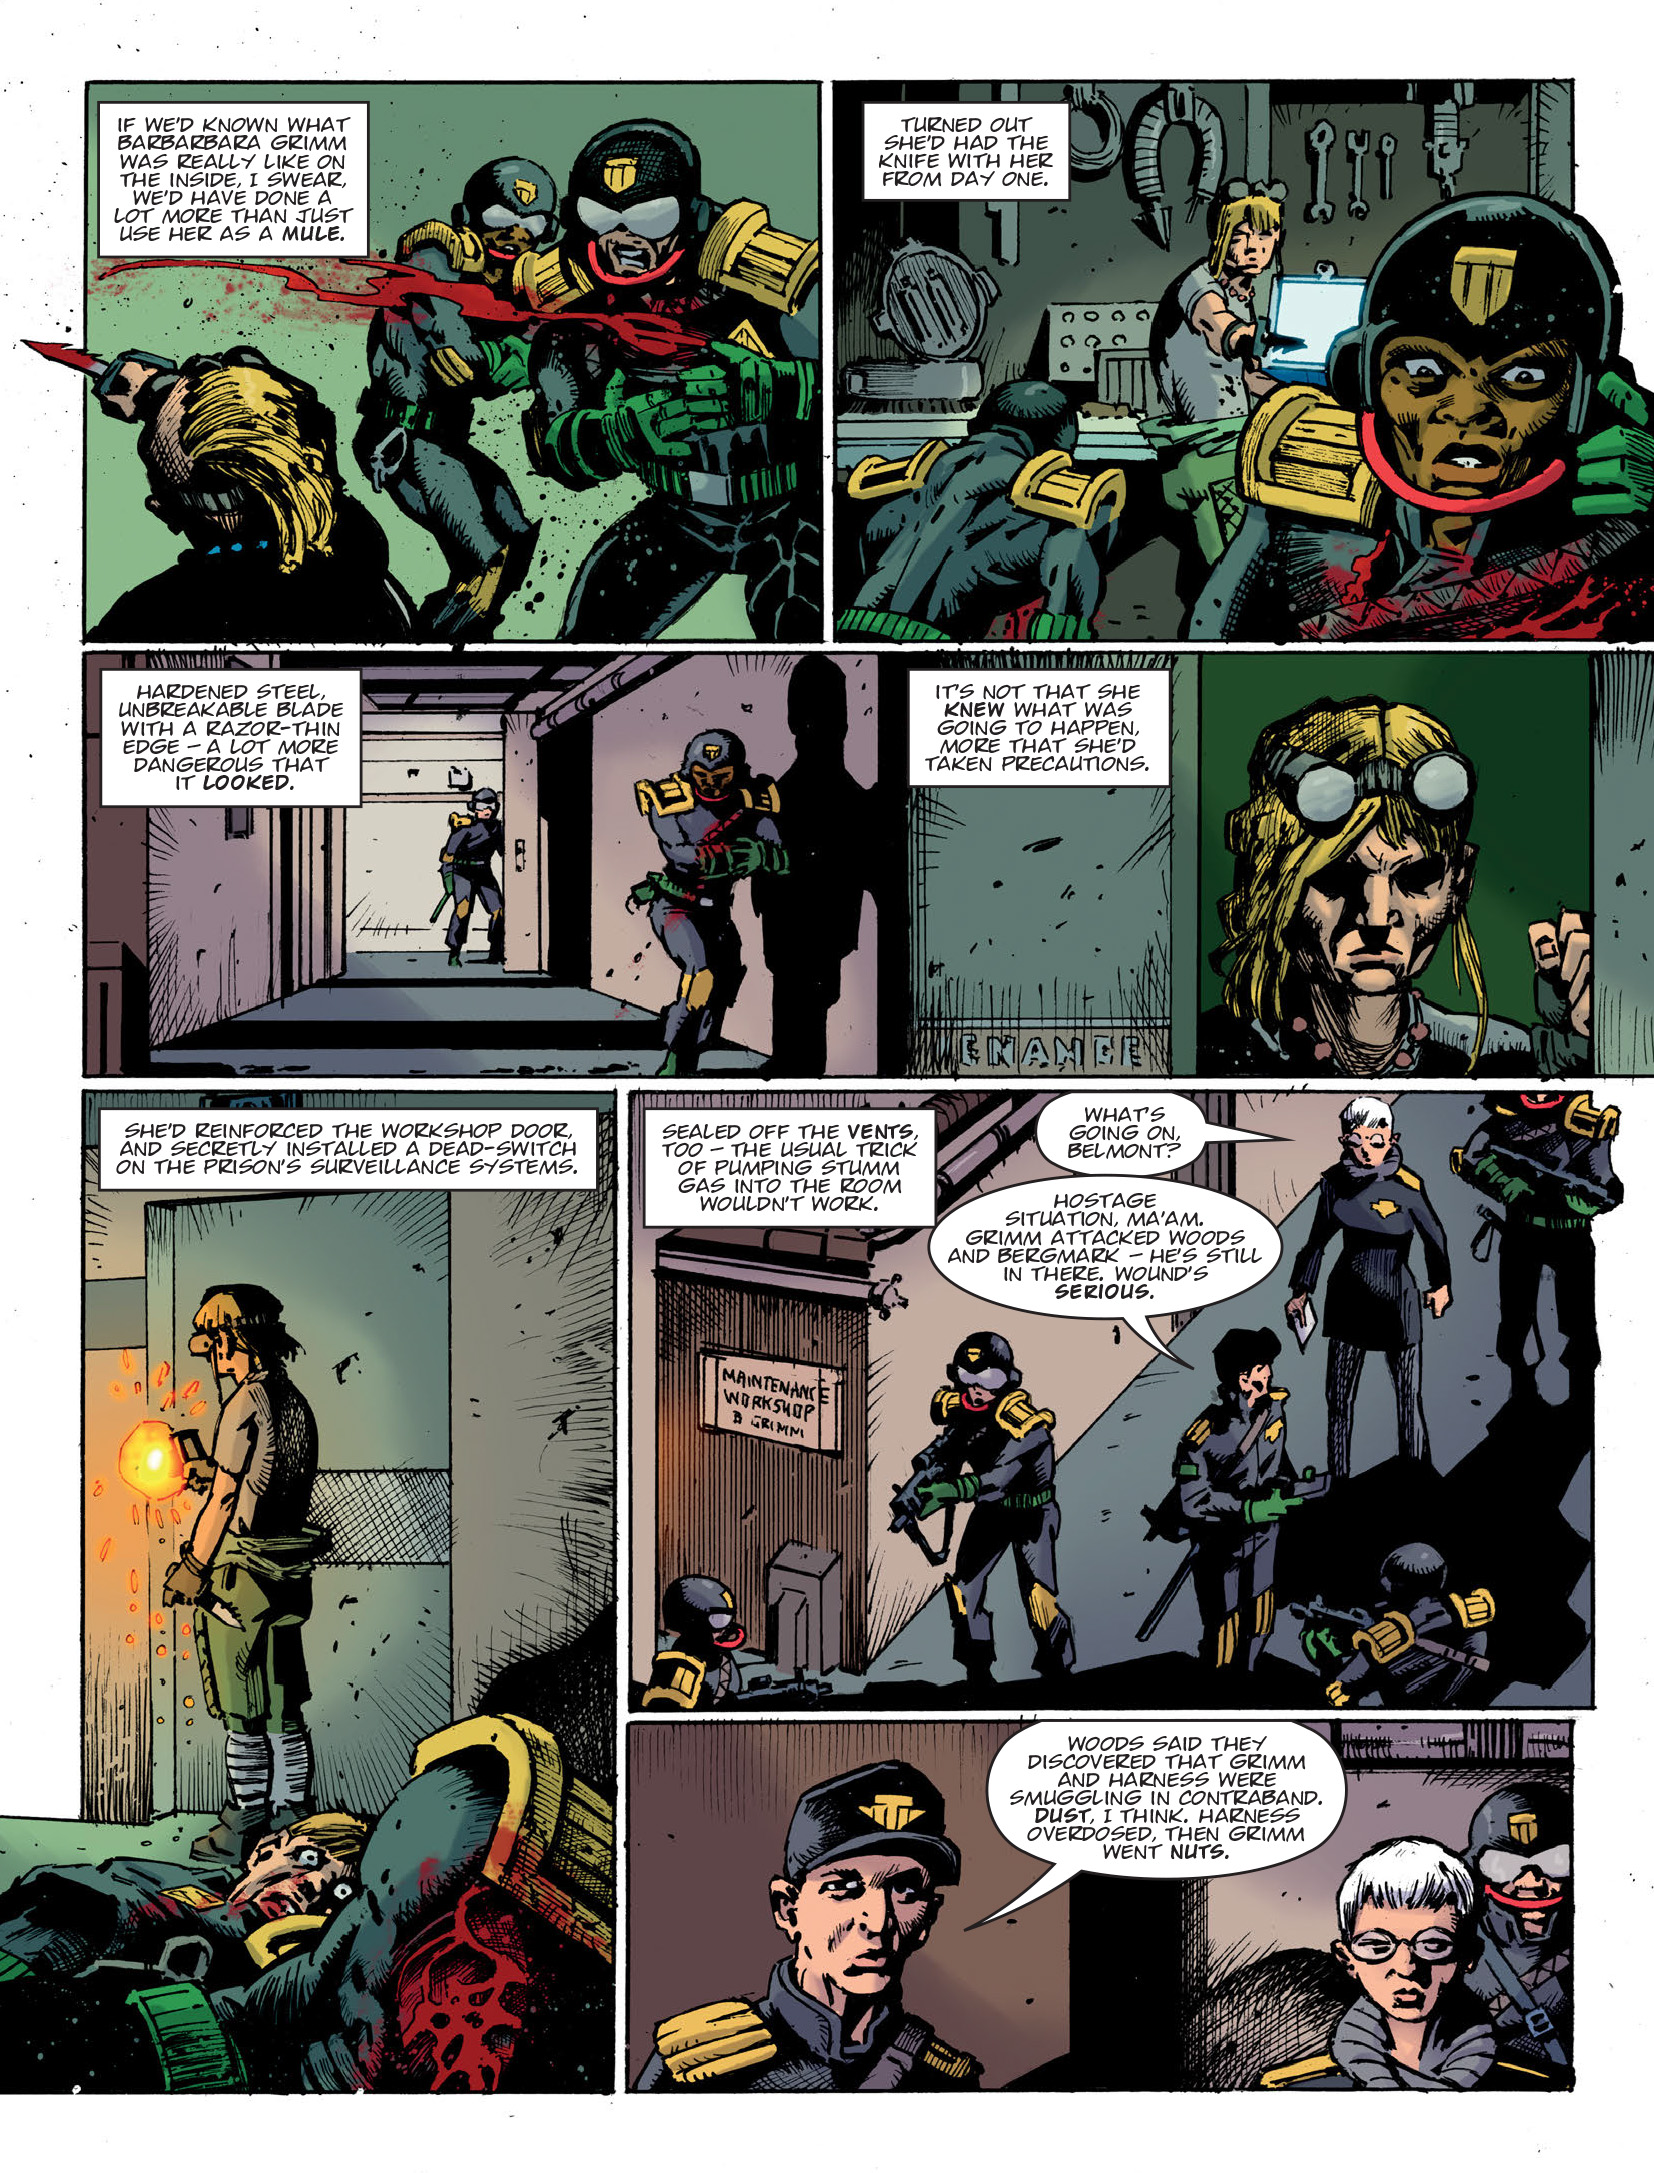 2000 AD: Chapter 2149 - Page 4